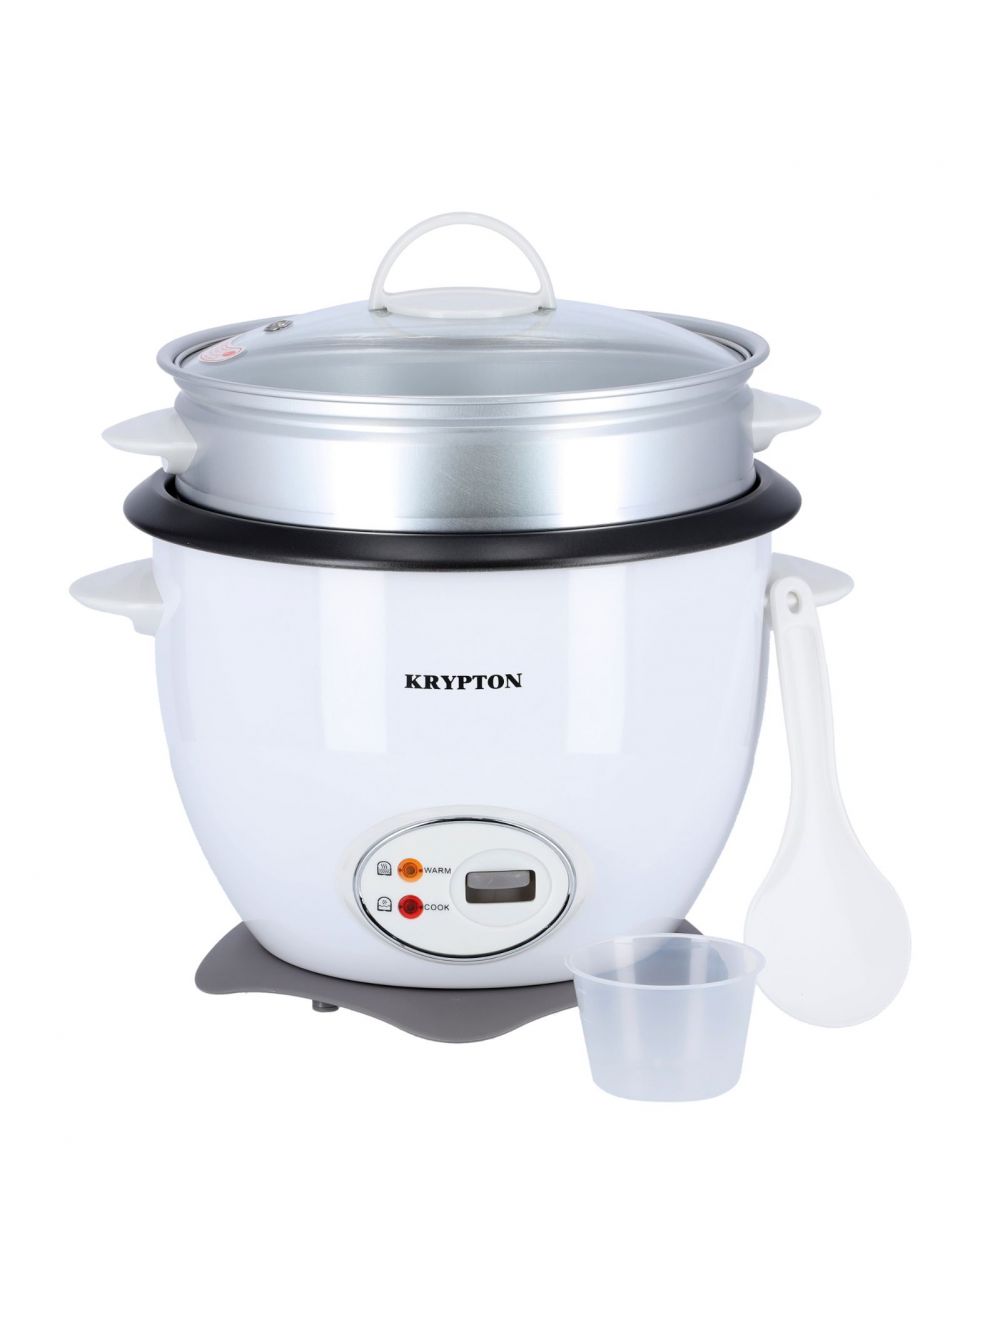 Krypton 700W 1.8 L Rice Cooker with Steamer-KNRC5283